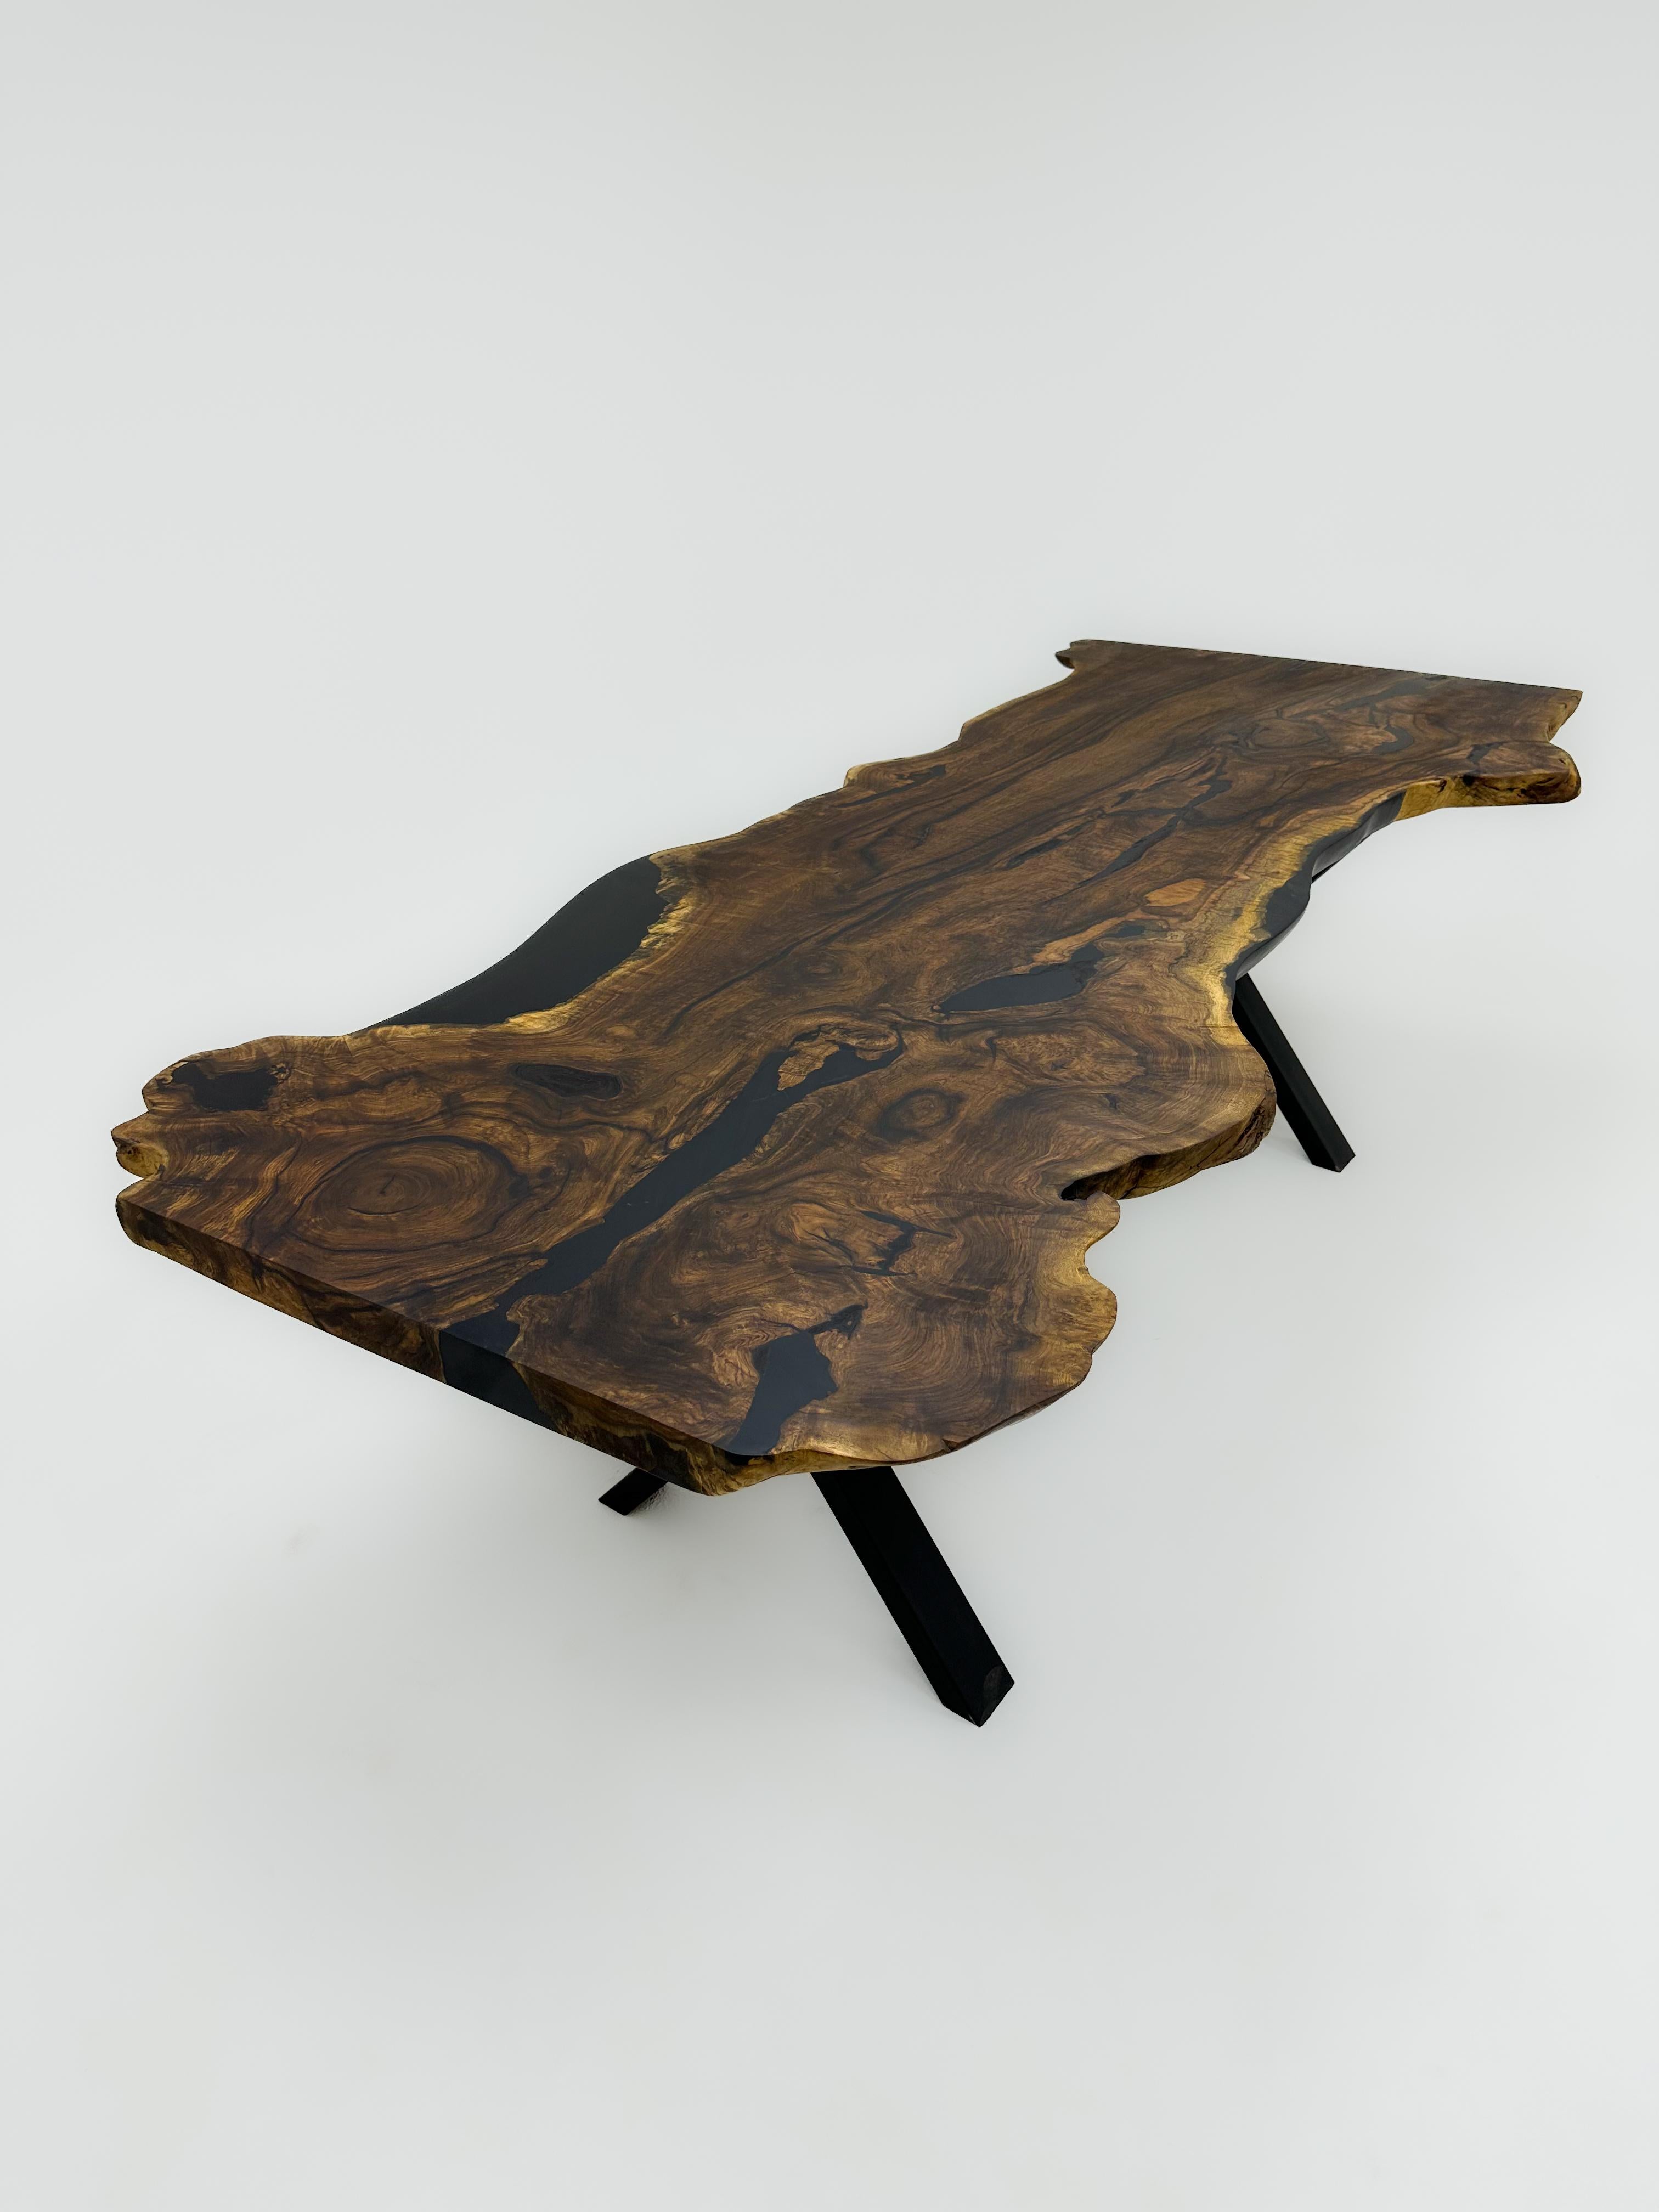 Woodwork Massive One Piece Slab Live Edge Walnut Wood Dining Table For Sale